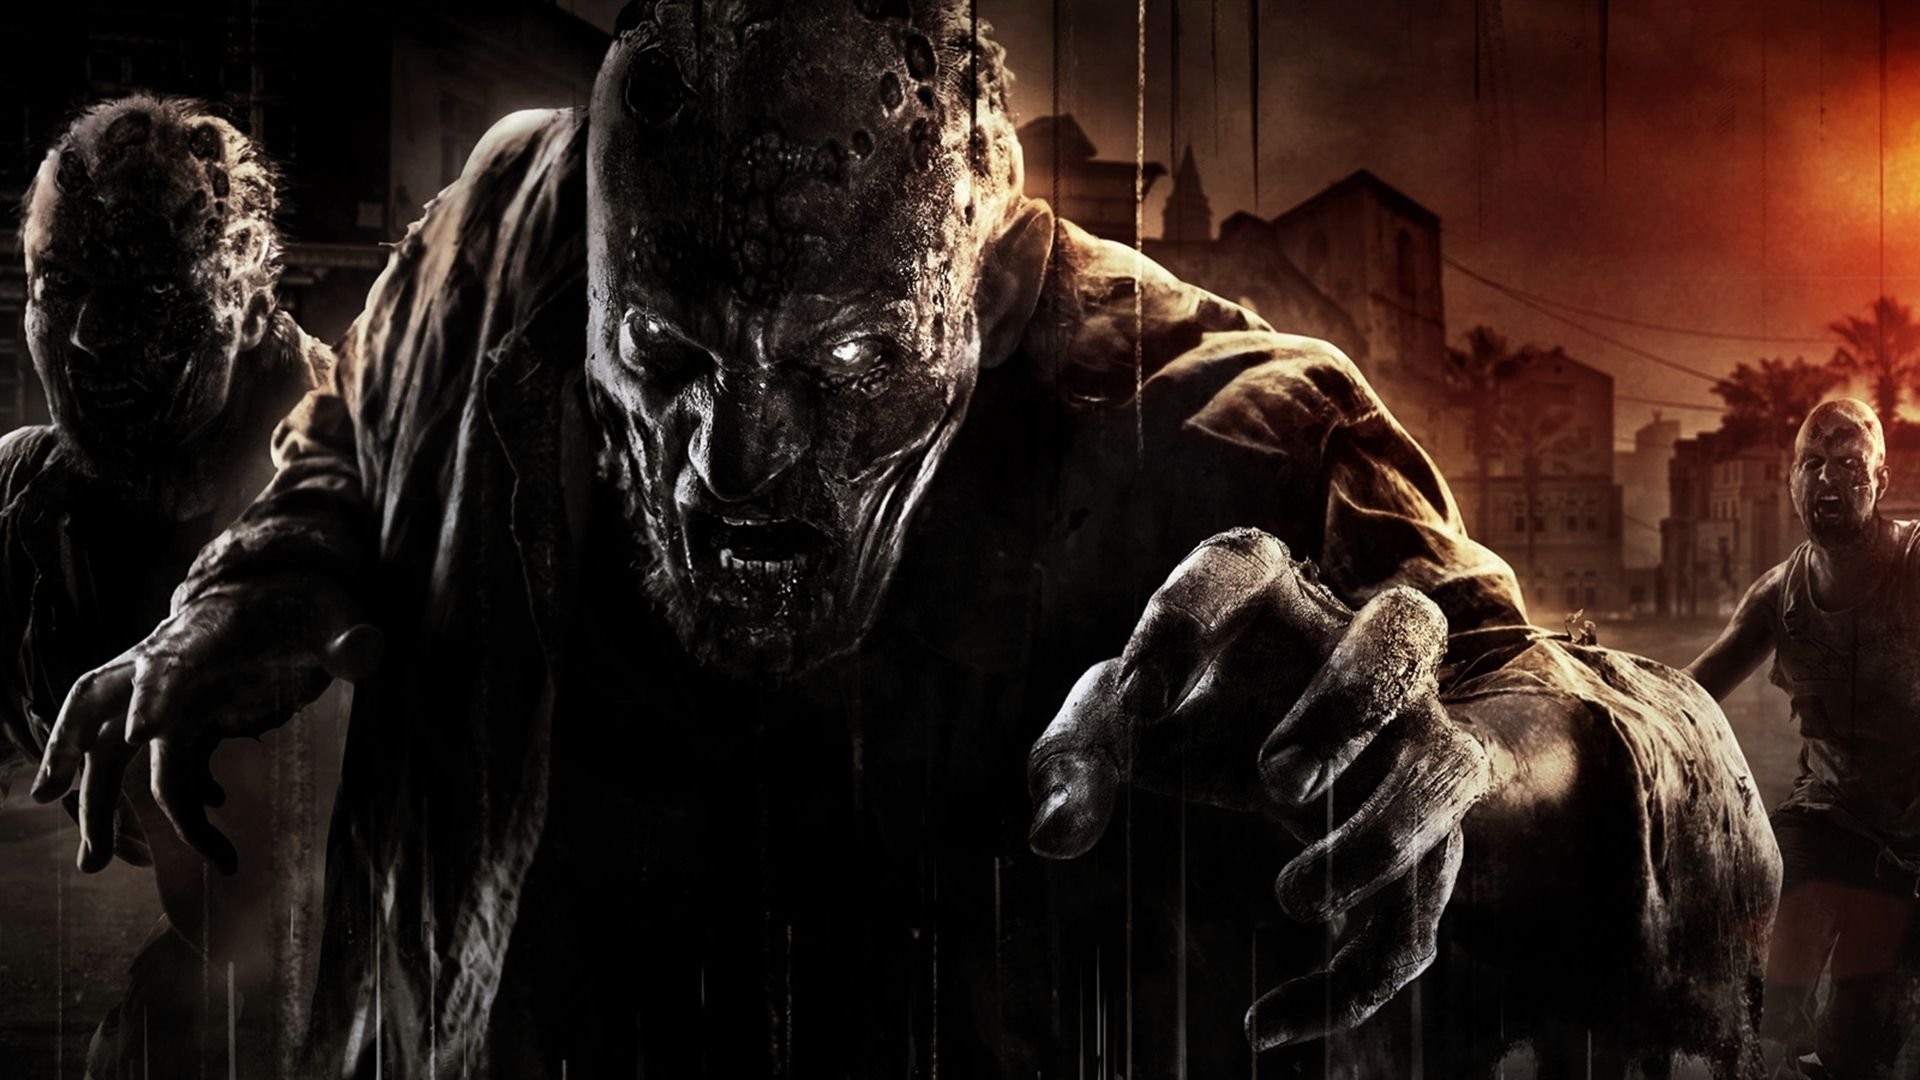 Dying Light Horror Survival Zombie Apocalyptic Dark Action 1dlight Rpg Wallpaper At Dark Wallpapers